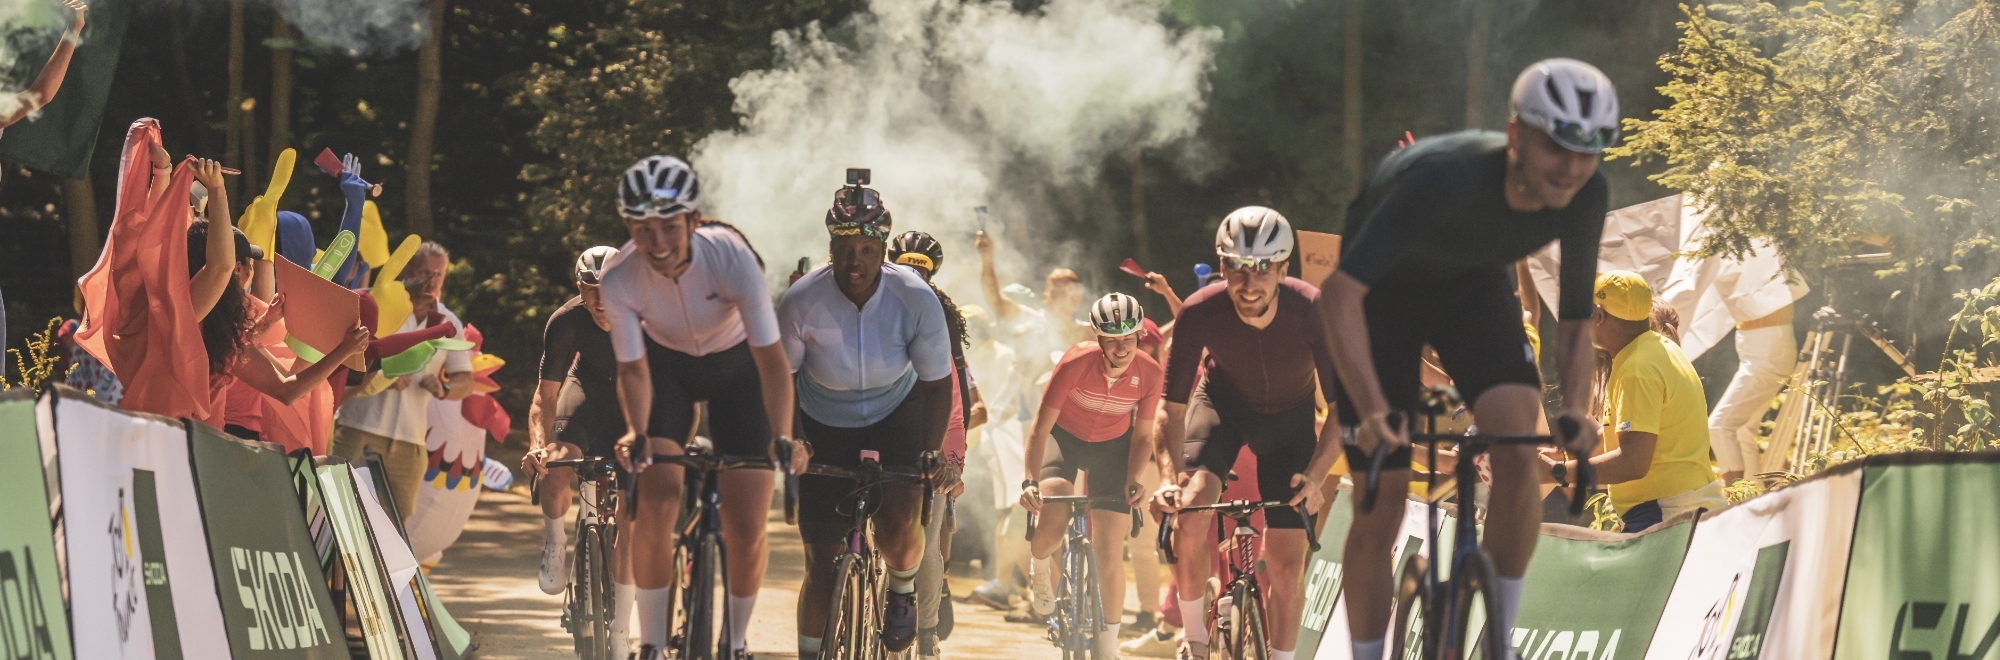 Škoda turns Sunday cyclists into Tour de France champions to celebrate 20 years sponsoring the event